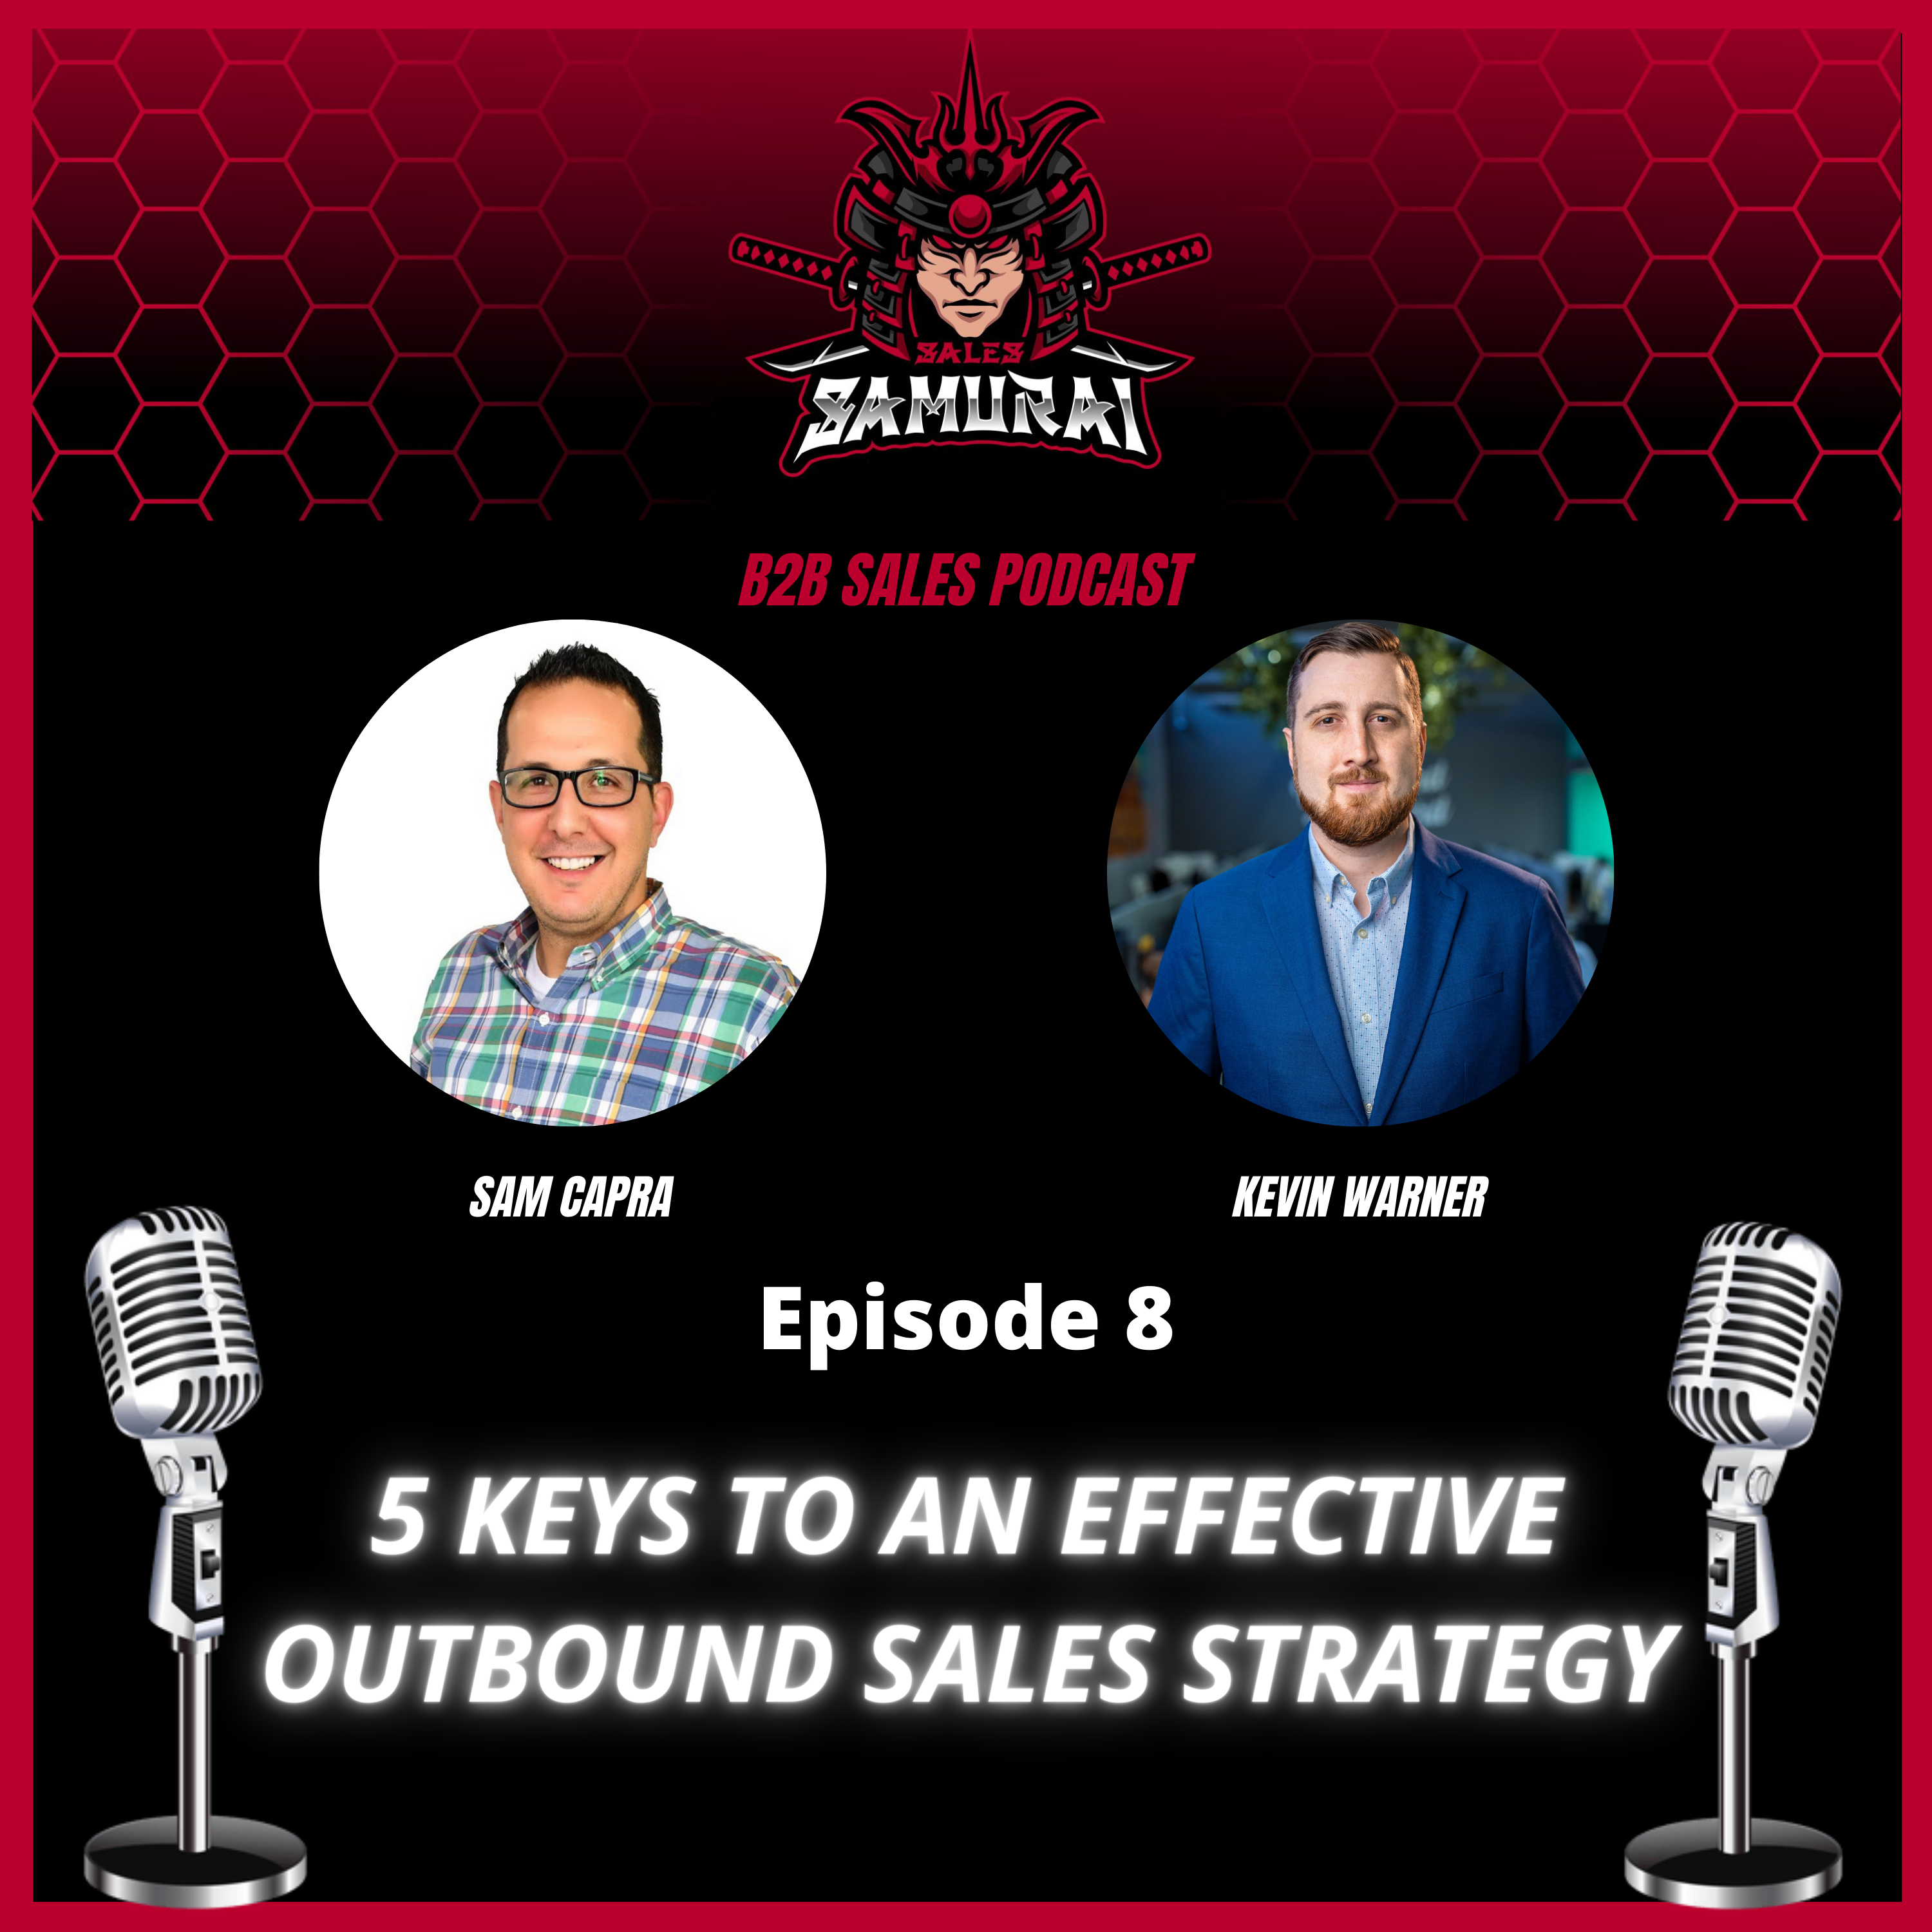 5 Keys to an Effective Outbound Sales Strategy